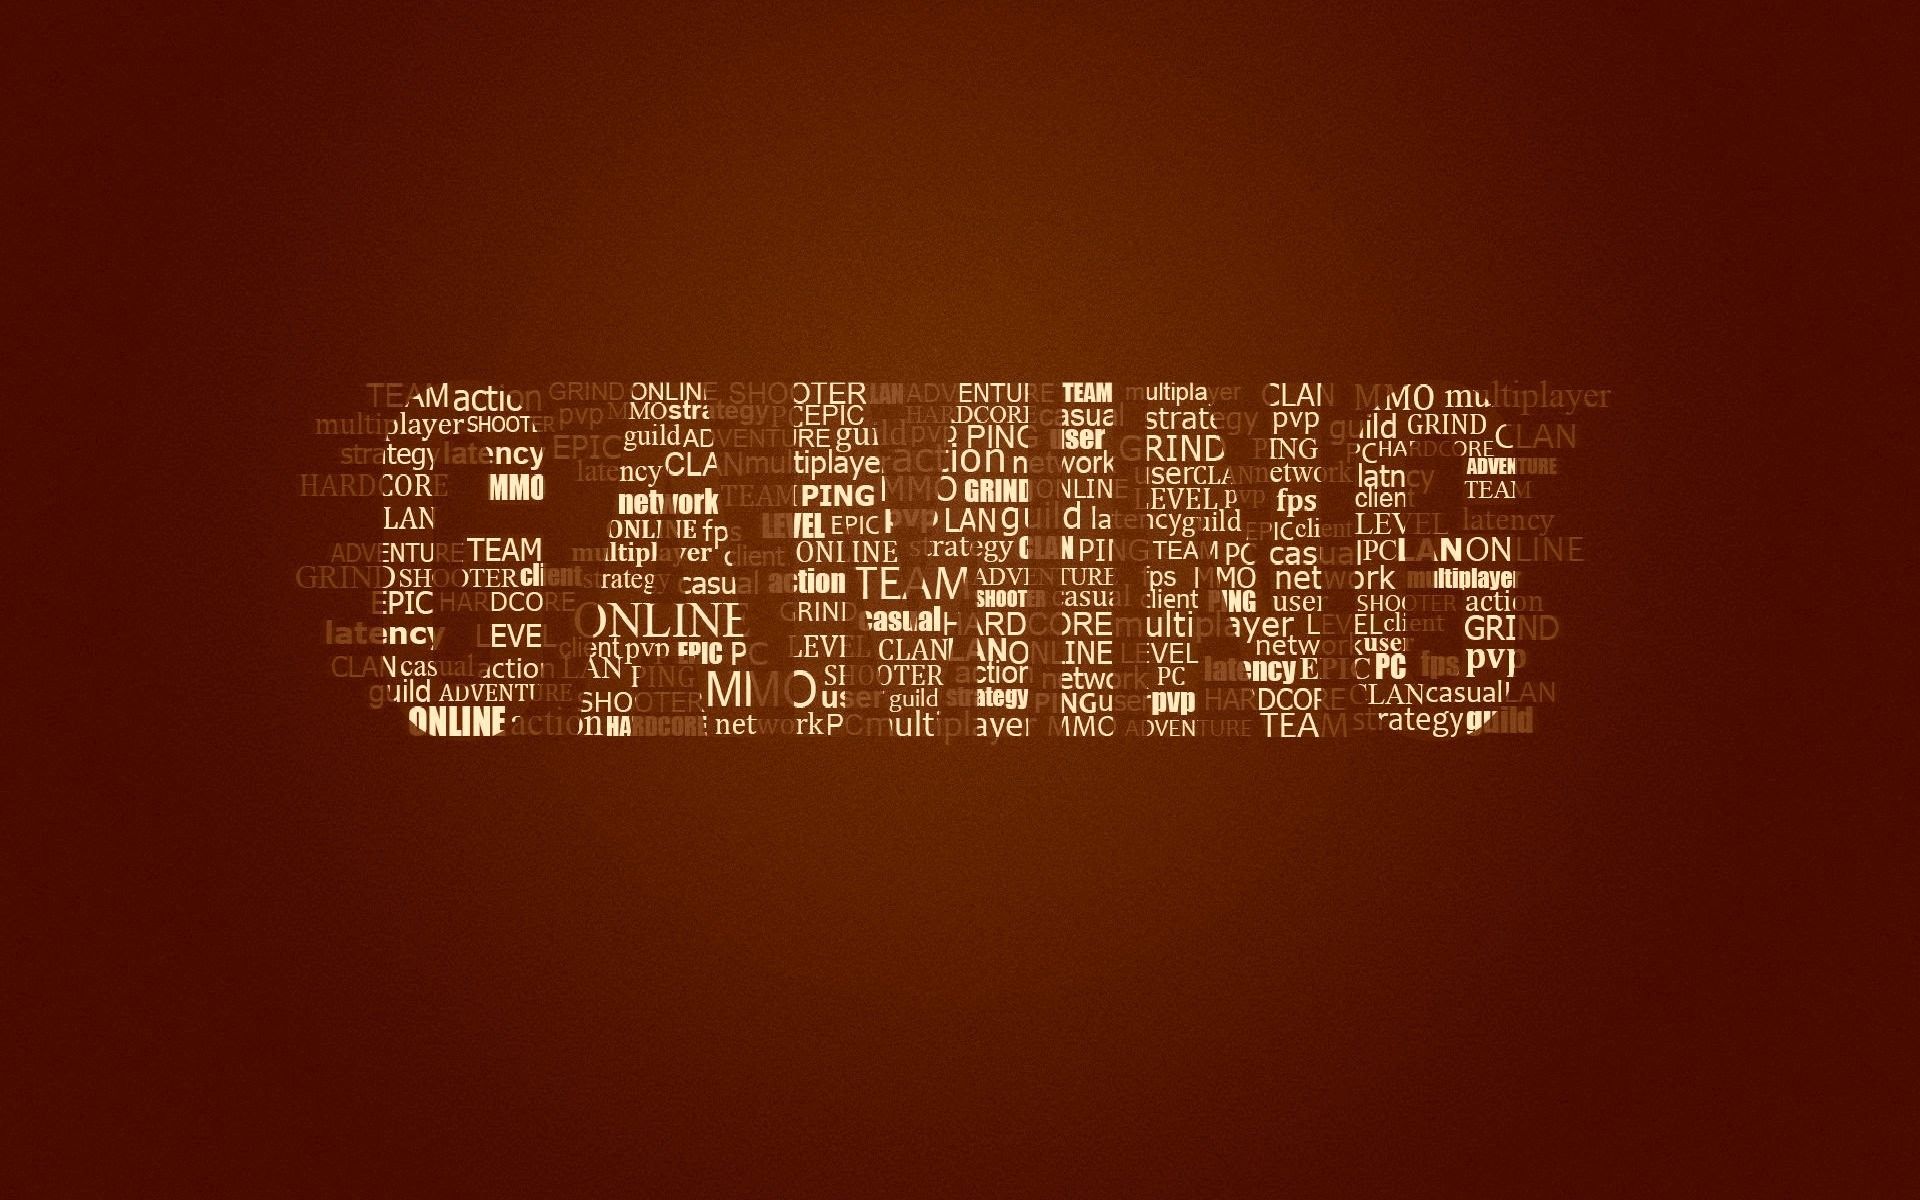 Game, Letters, Computer, quotes Wallpaper HD, Quote About Life, Video, Souls, Smart Phone, Poster Gamer, gaming